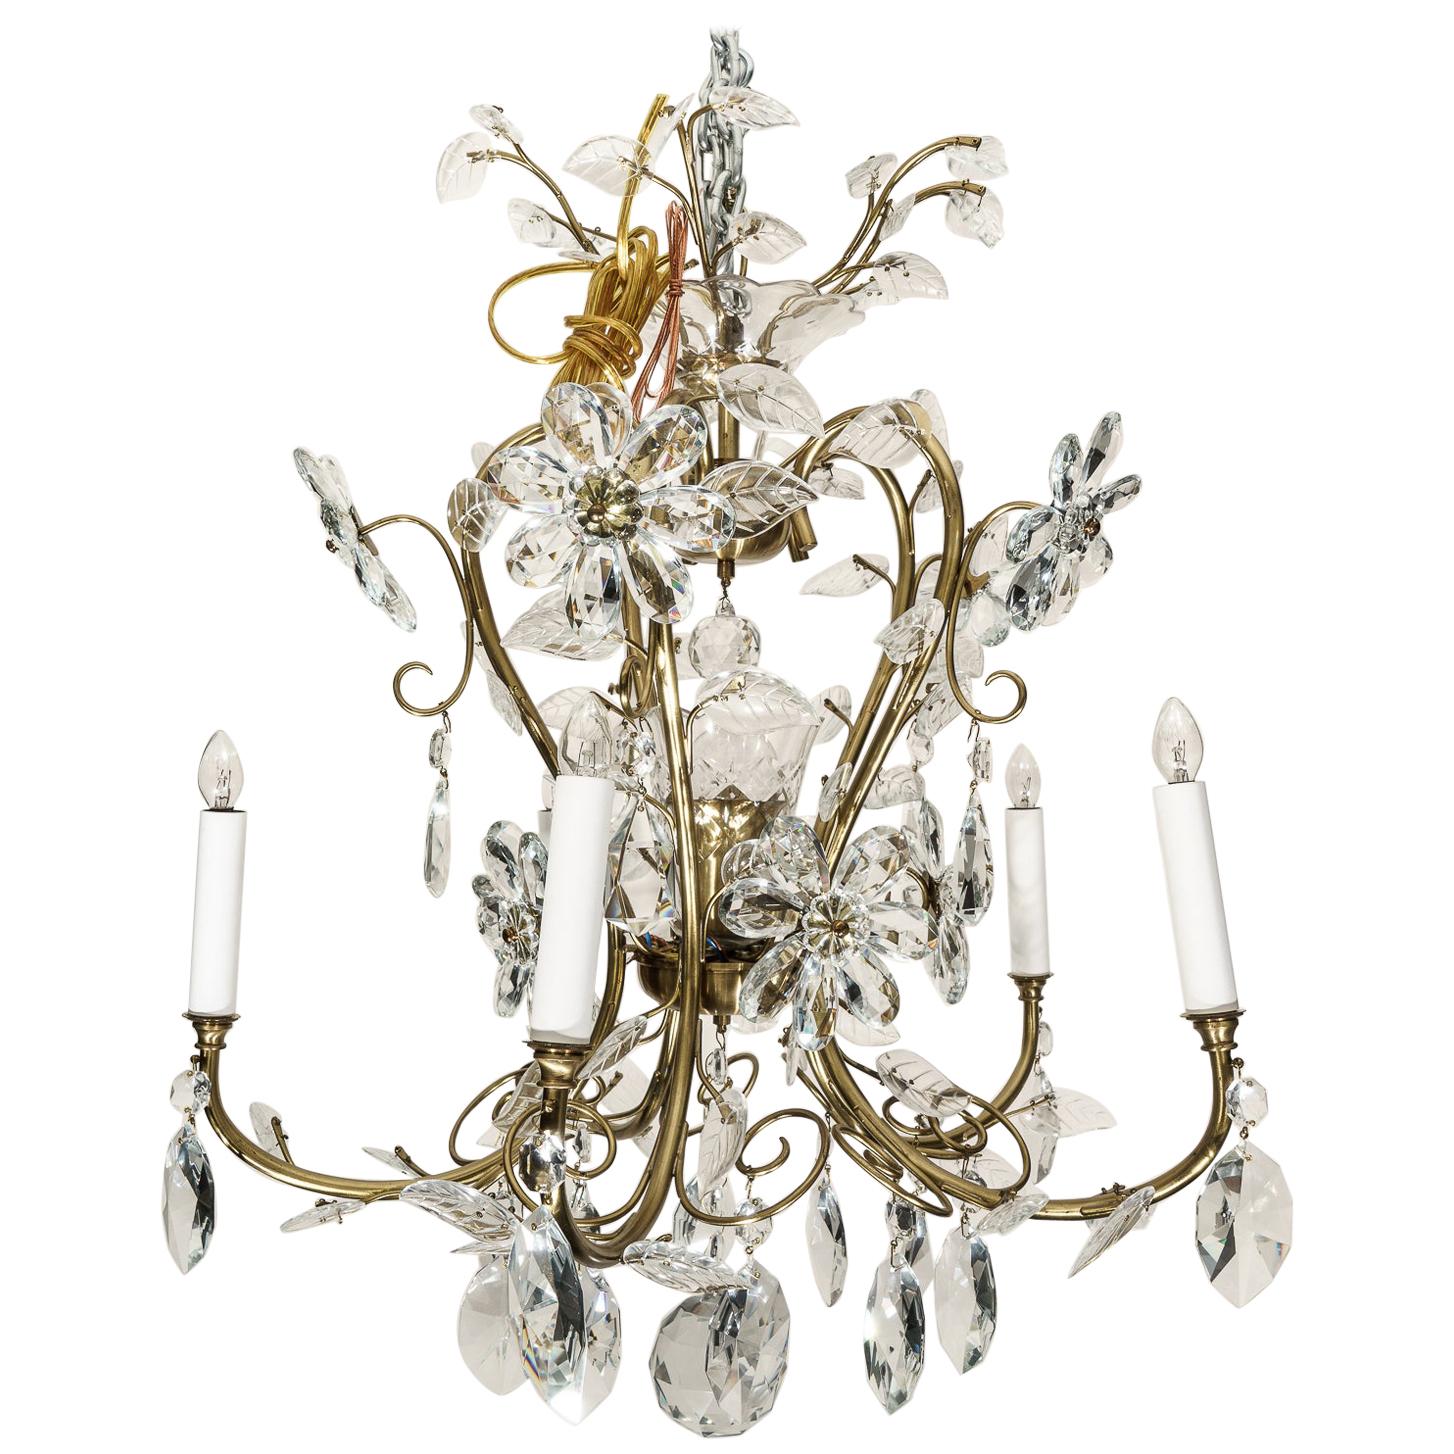 Louis XV Style Crystal and Brass Chandelier